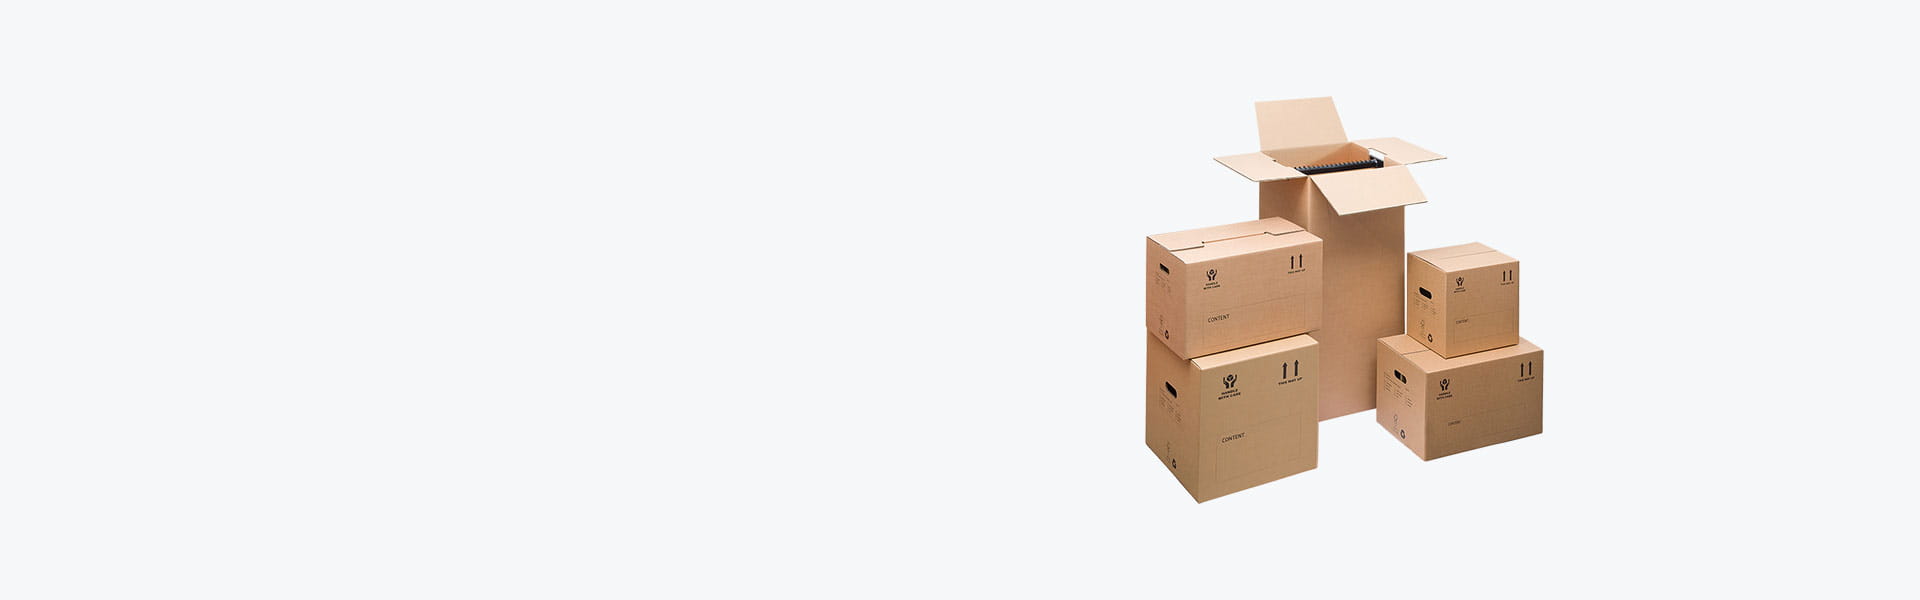 Make moving easier with Shurgard moving boxes